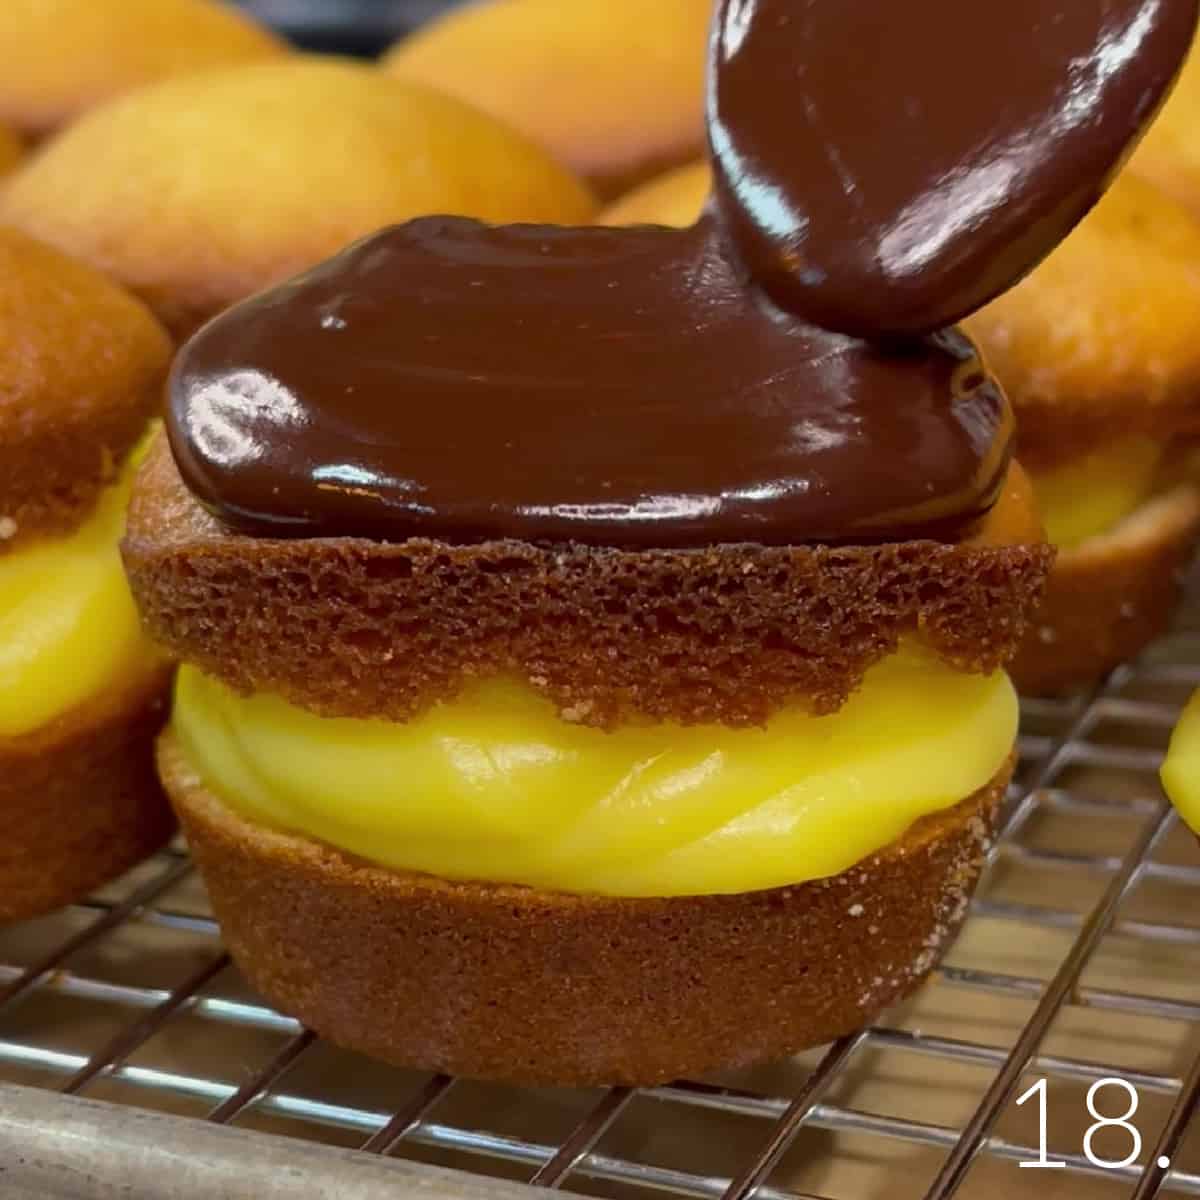 A glossy chocolate ganache frosting being put onto a Boston Cream Cupcake with a spoon.